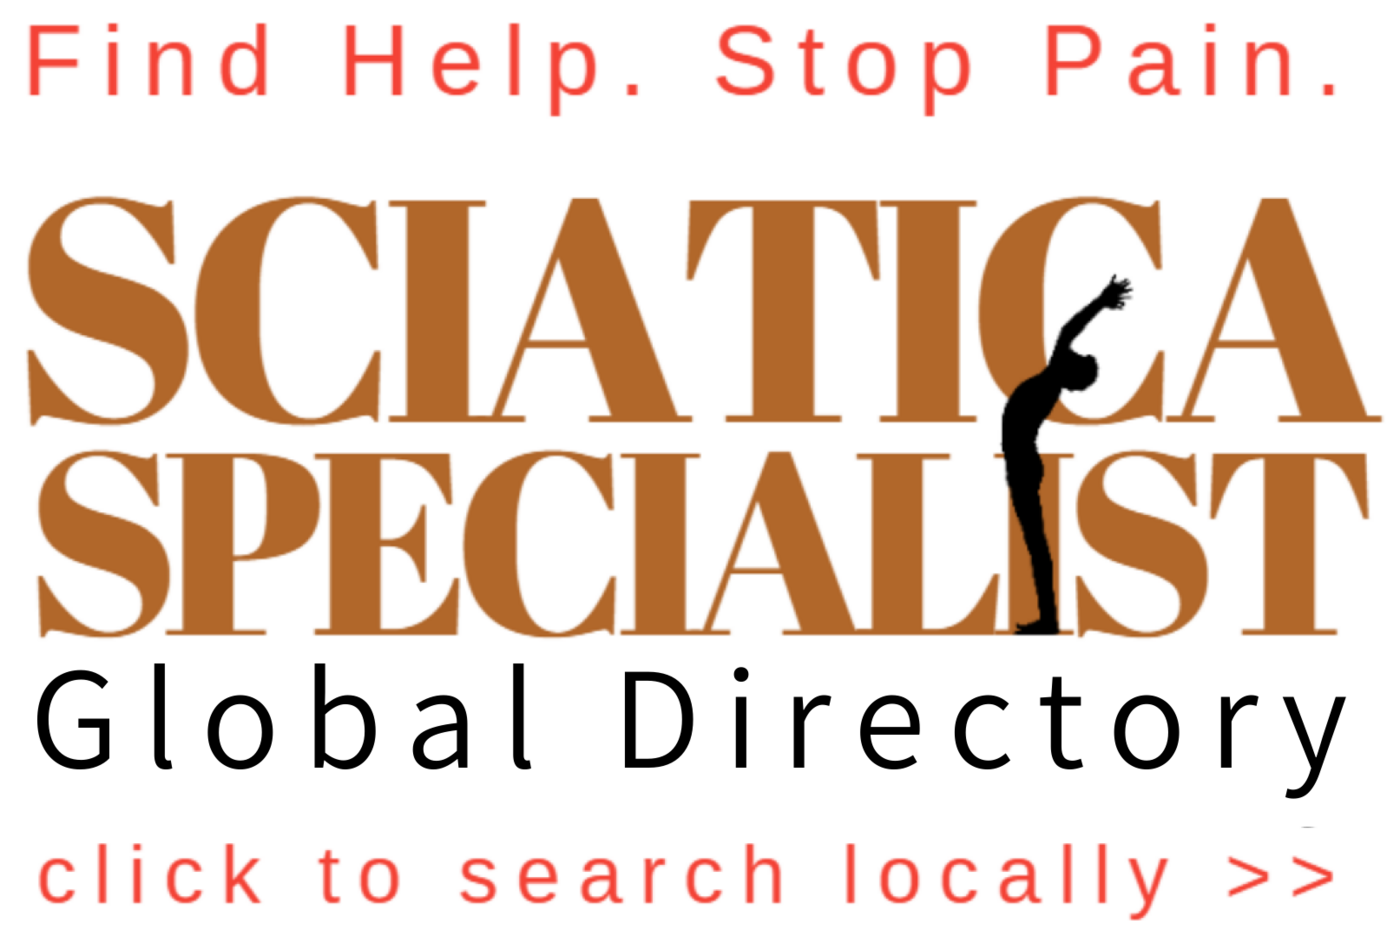 sciatica pain specialists global directory natural alternative health practitioners US international search sciaticapainstop.com